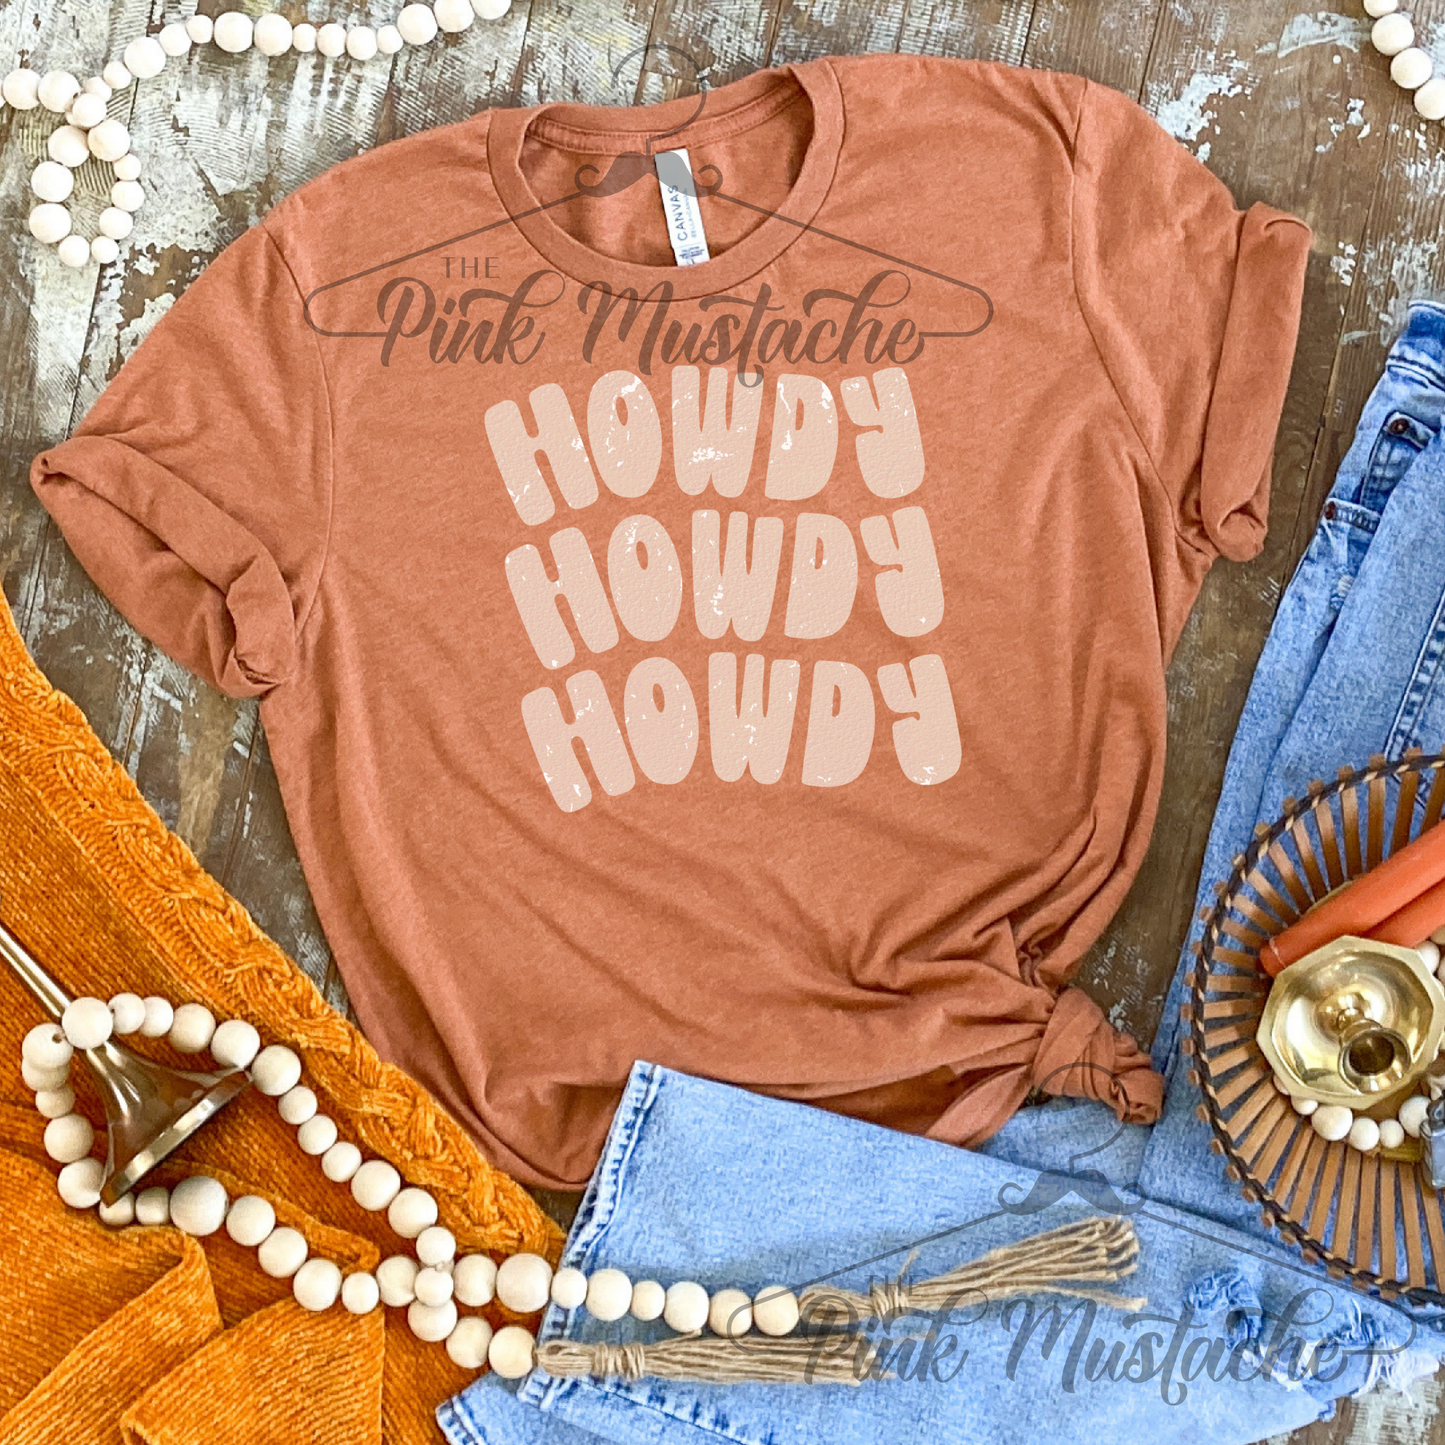 Howdy Howdy Howdy Stacked Tee /Youth and Adult Sizes Available/ Country Western Unisex Softstyle T-Shirt